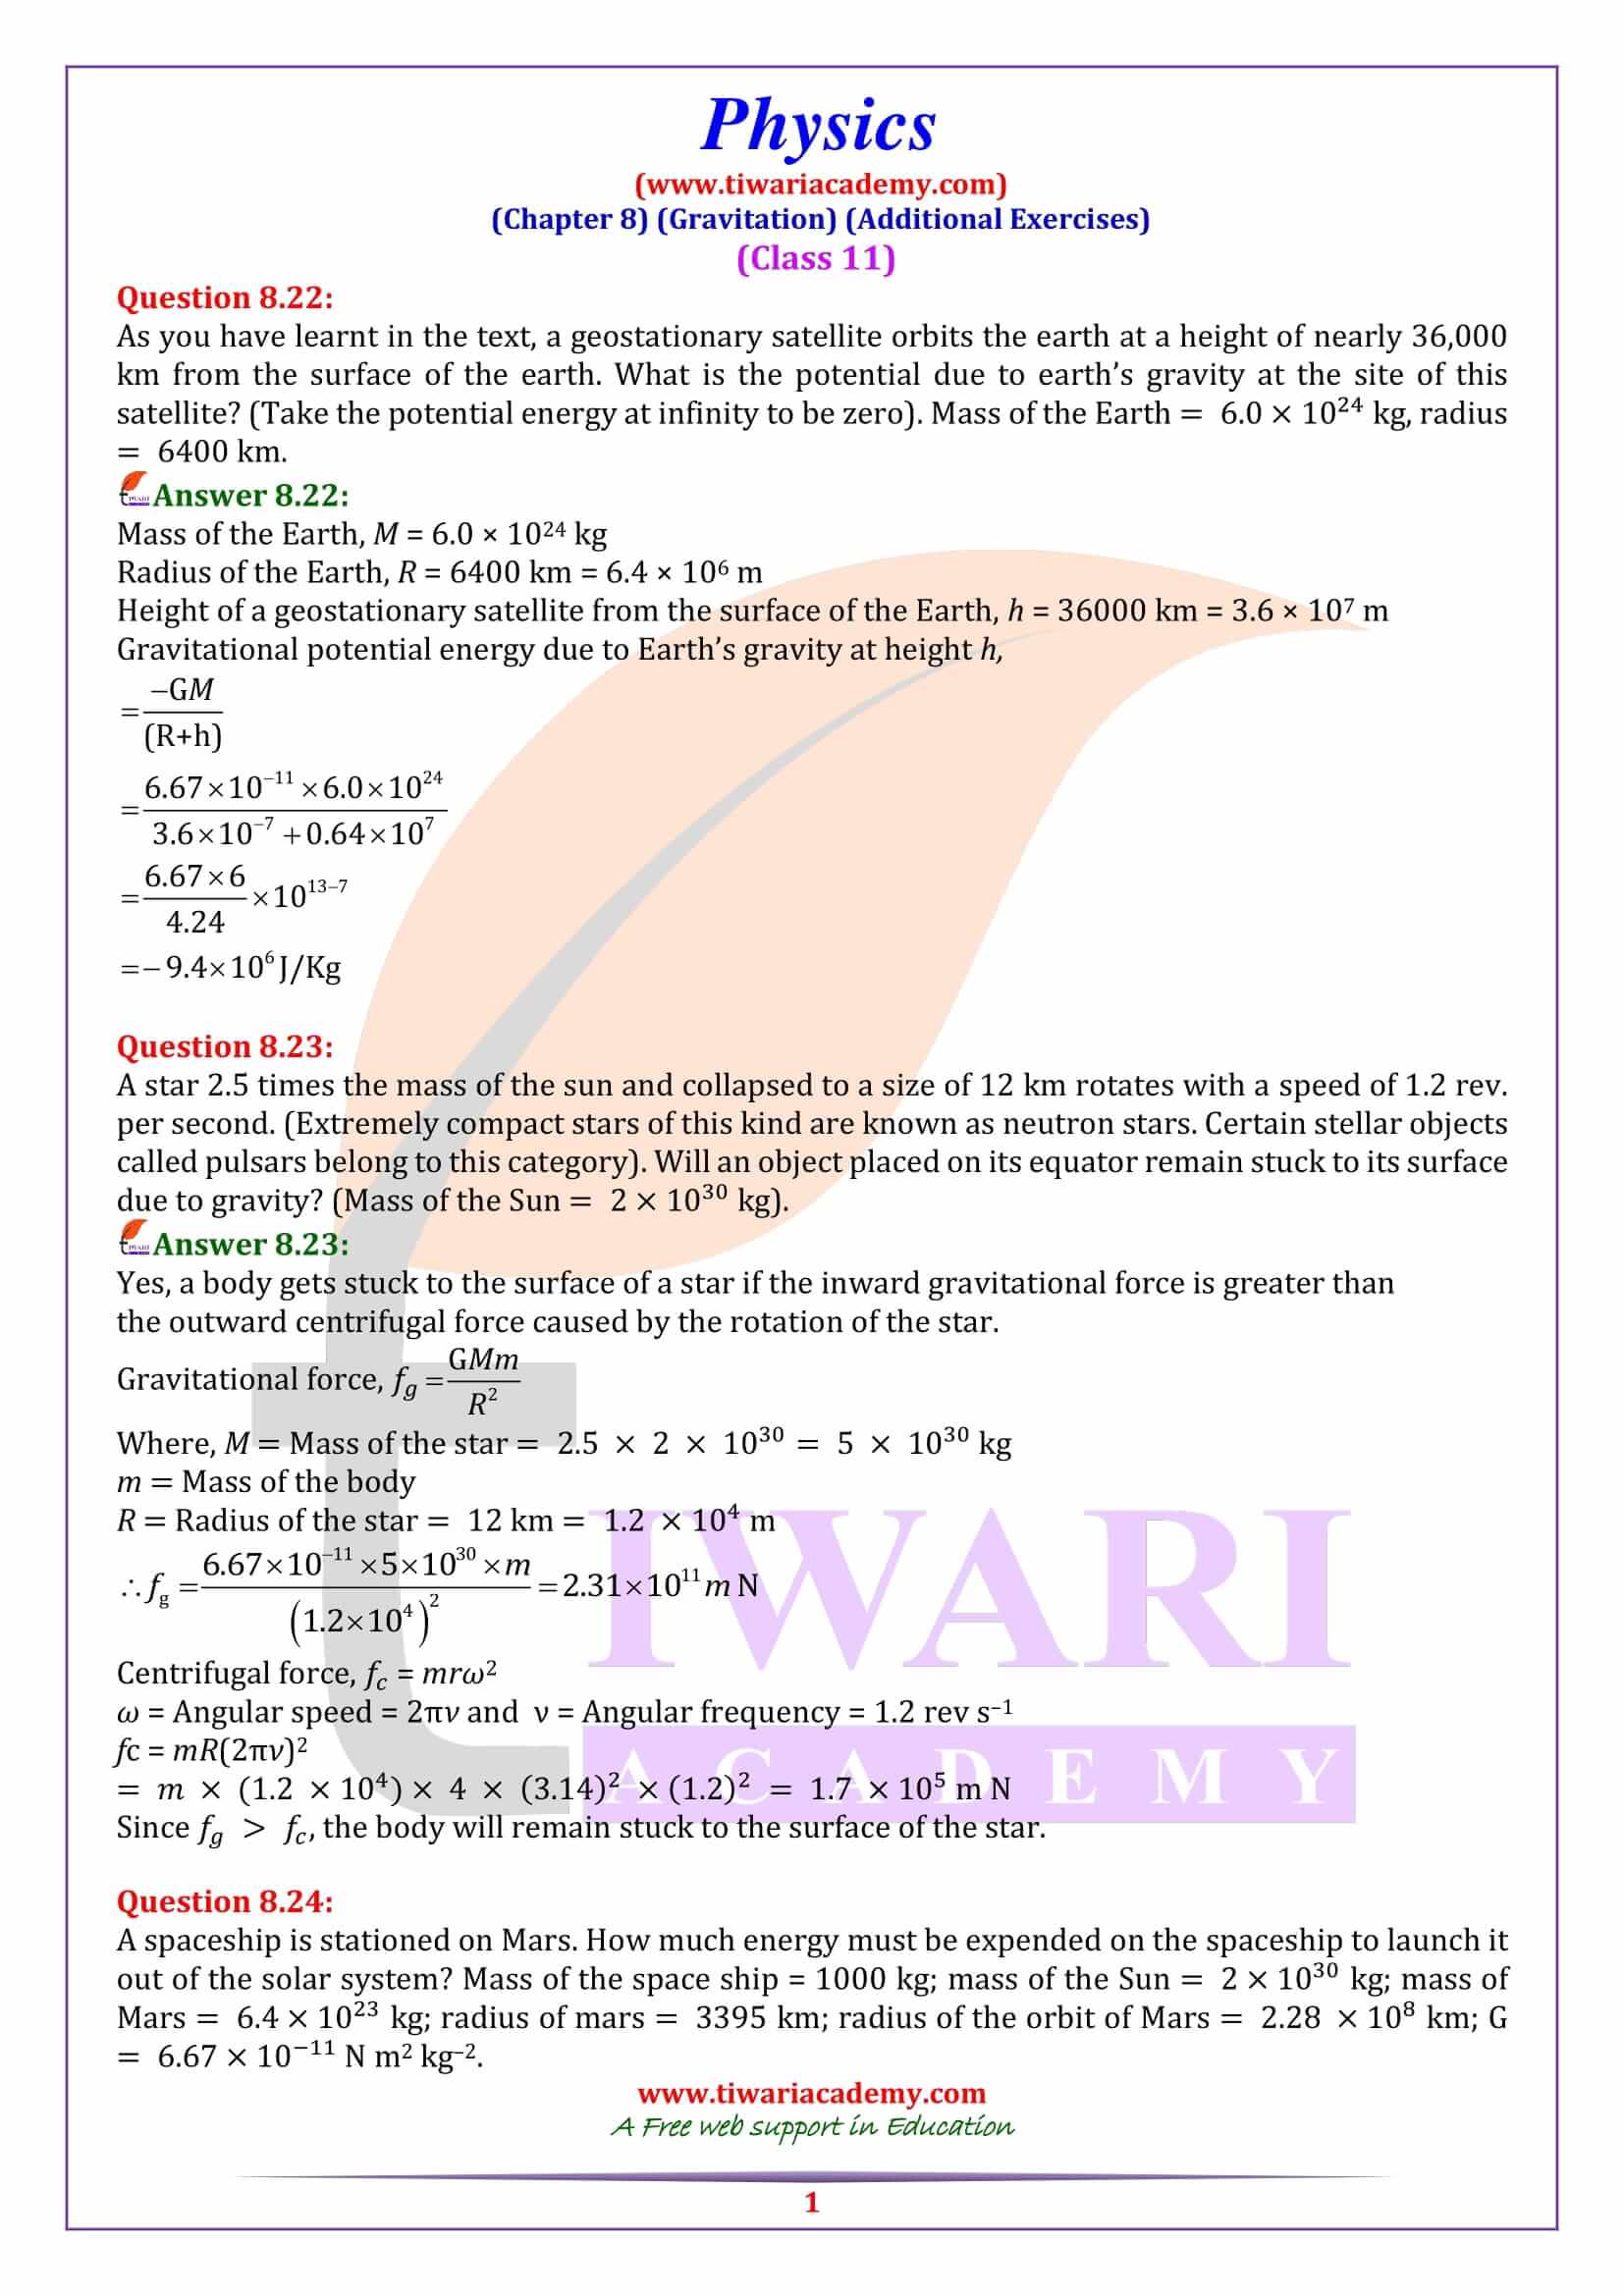 NCERT Solutions for Class 11 Physics Chapter 8 Gravitation Additional Exercises